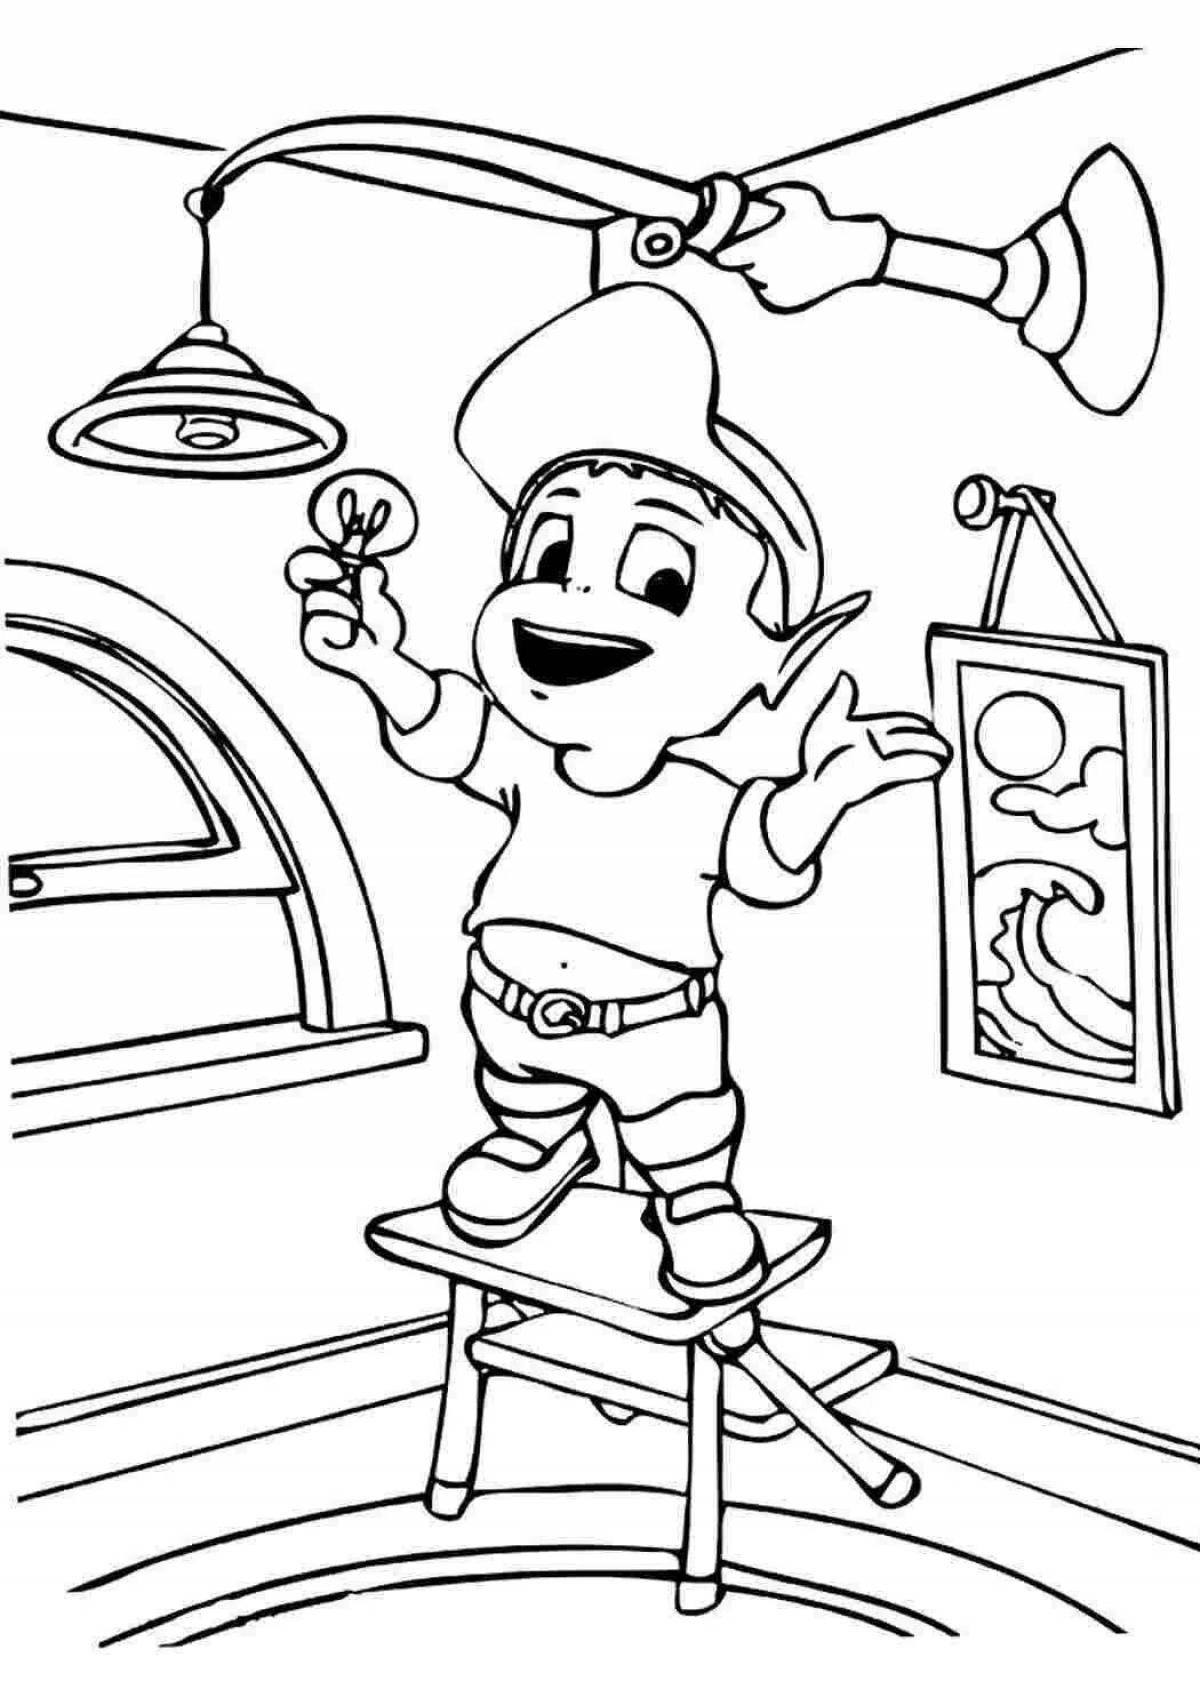 Home security coloring book